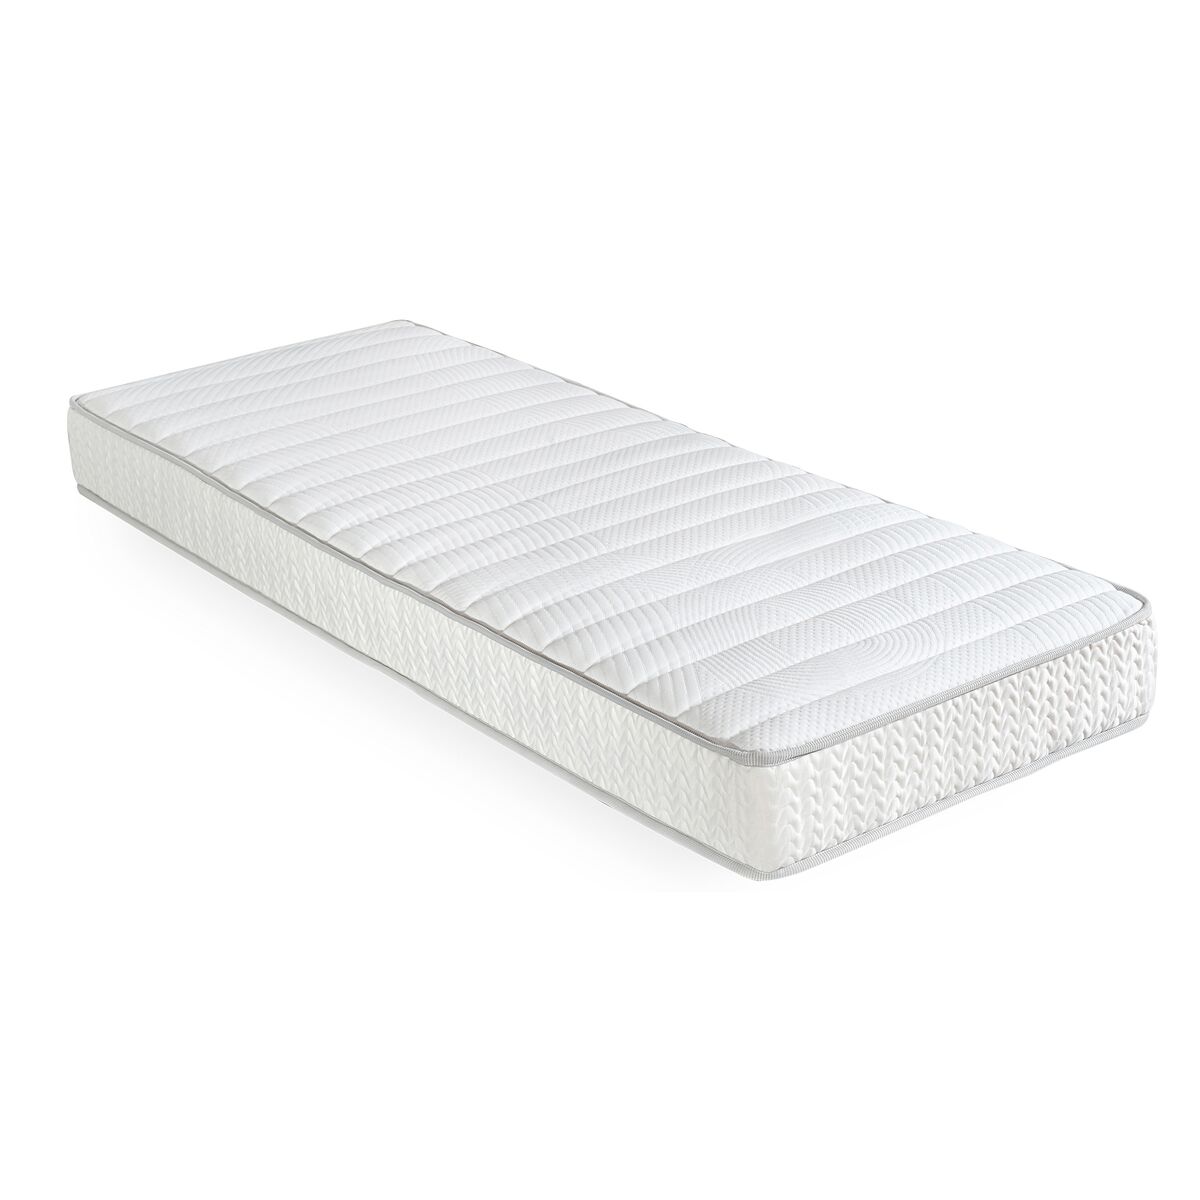 EPEDA Matelas relaxation Ressorts confort ferme Cosmo